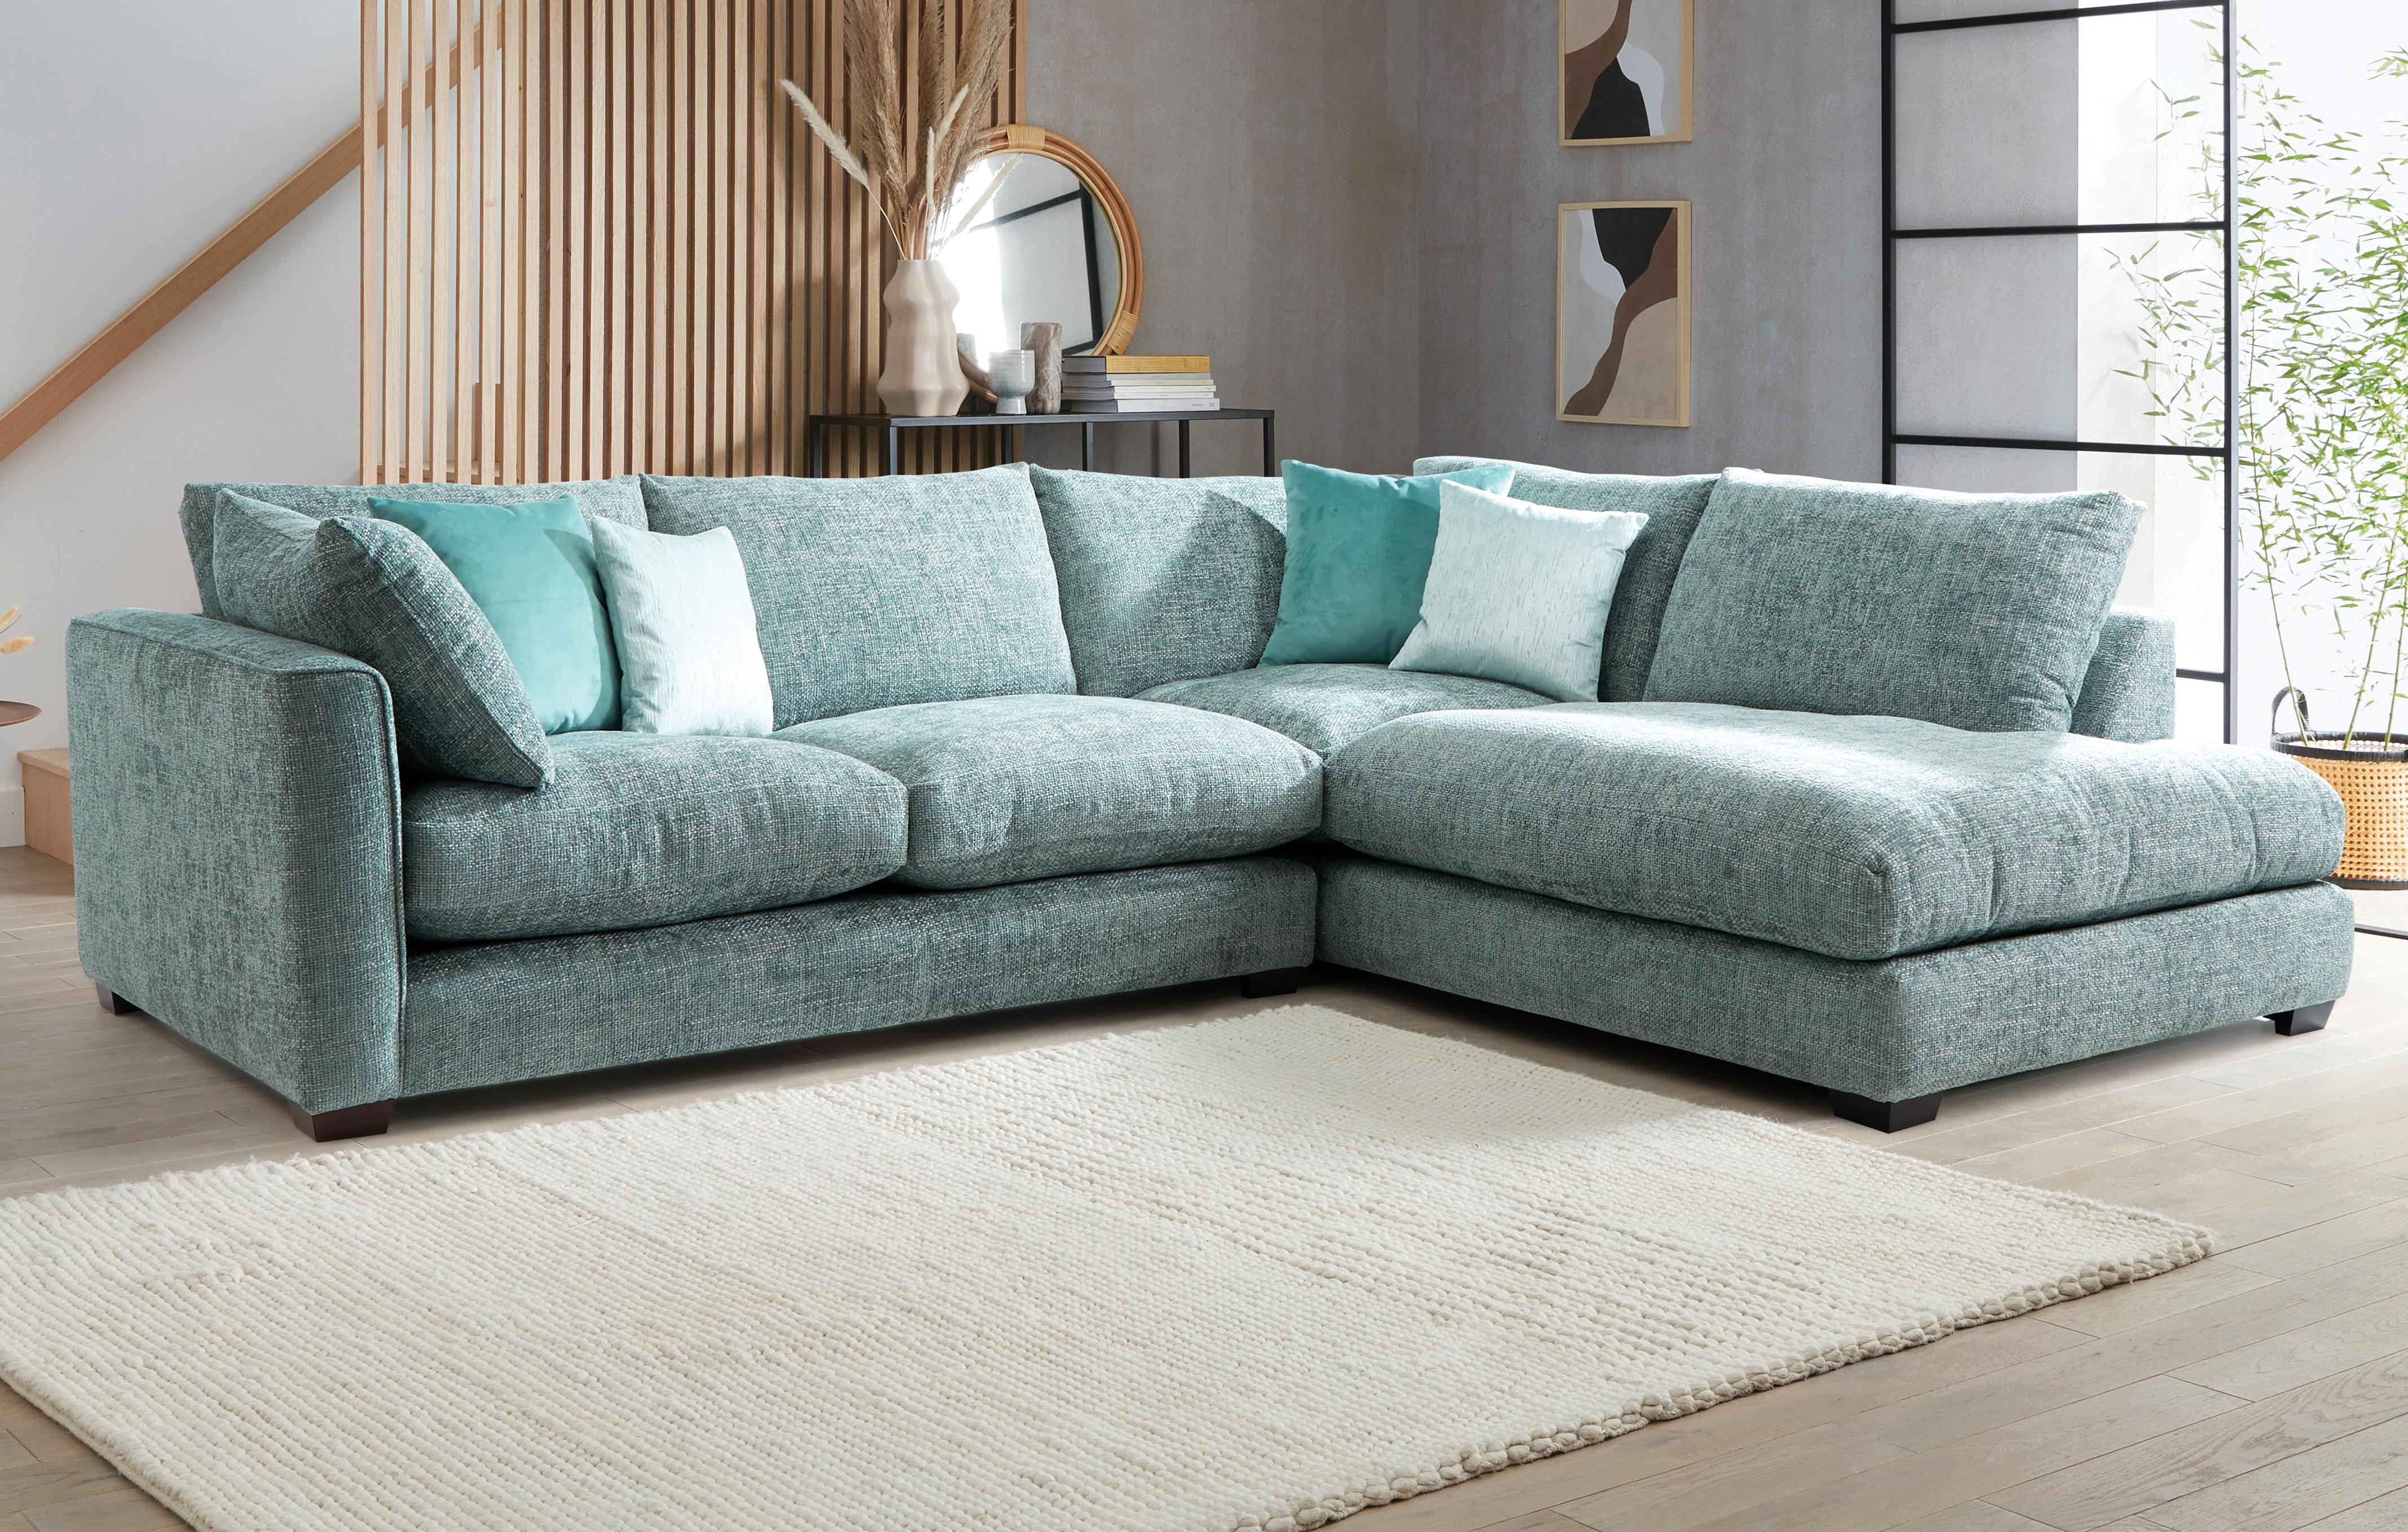 Sofa Corner Dfs 2013 - Our corner sofas are handmade in the uk by expert craftsmen and are ...